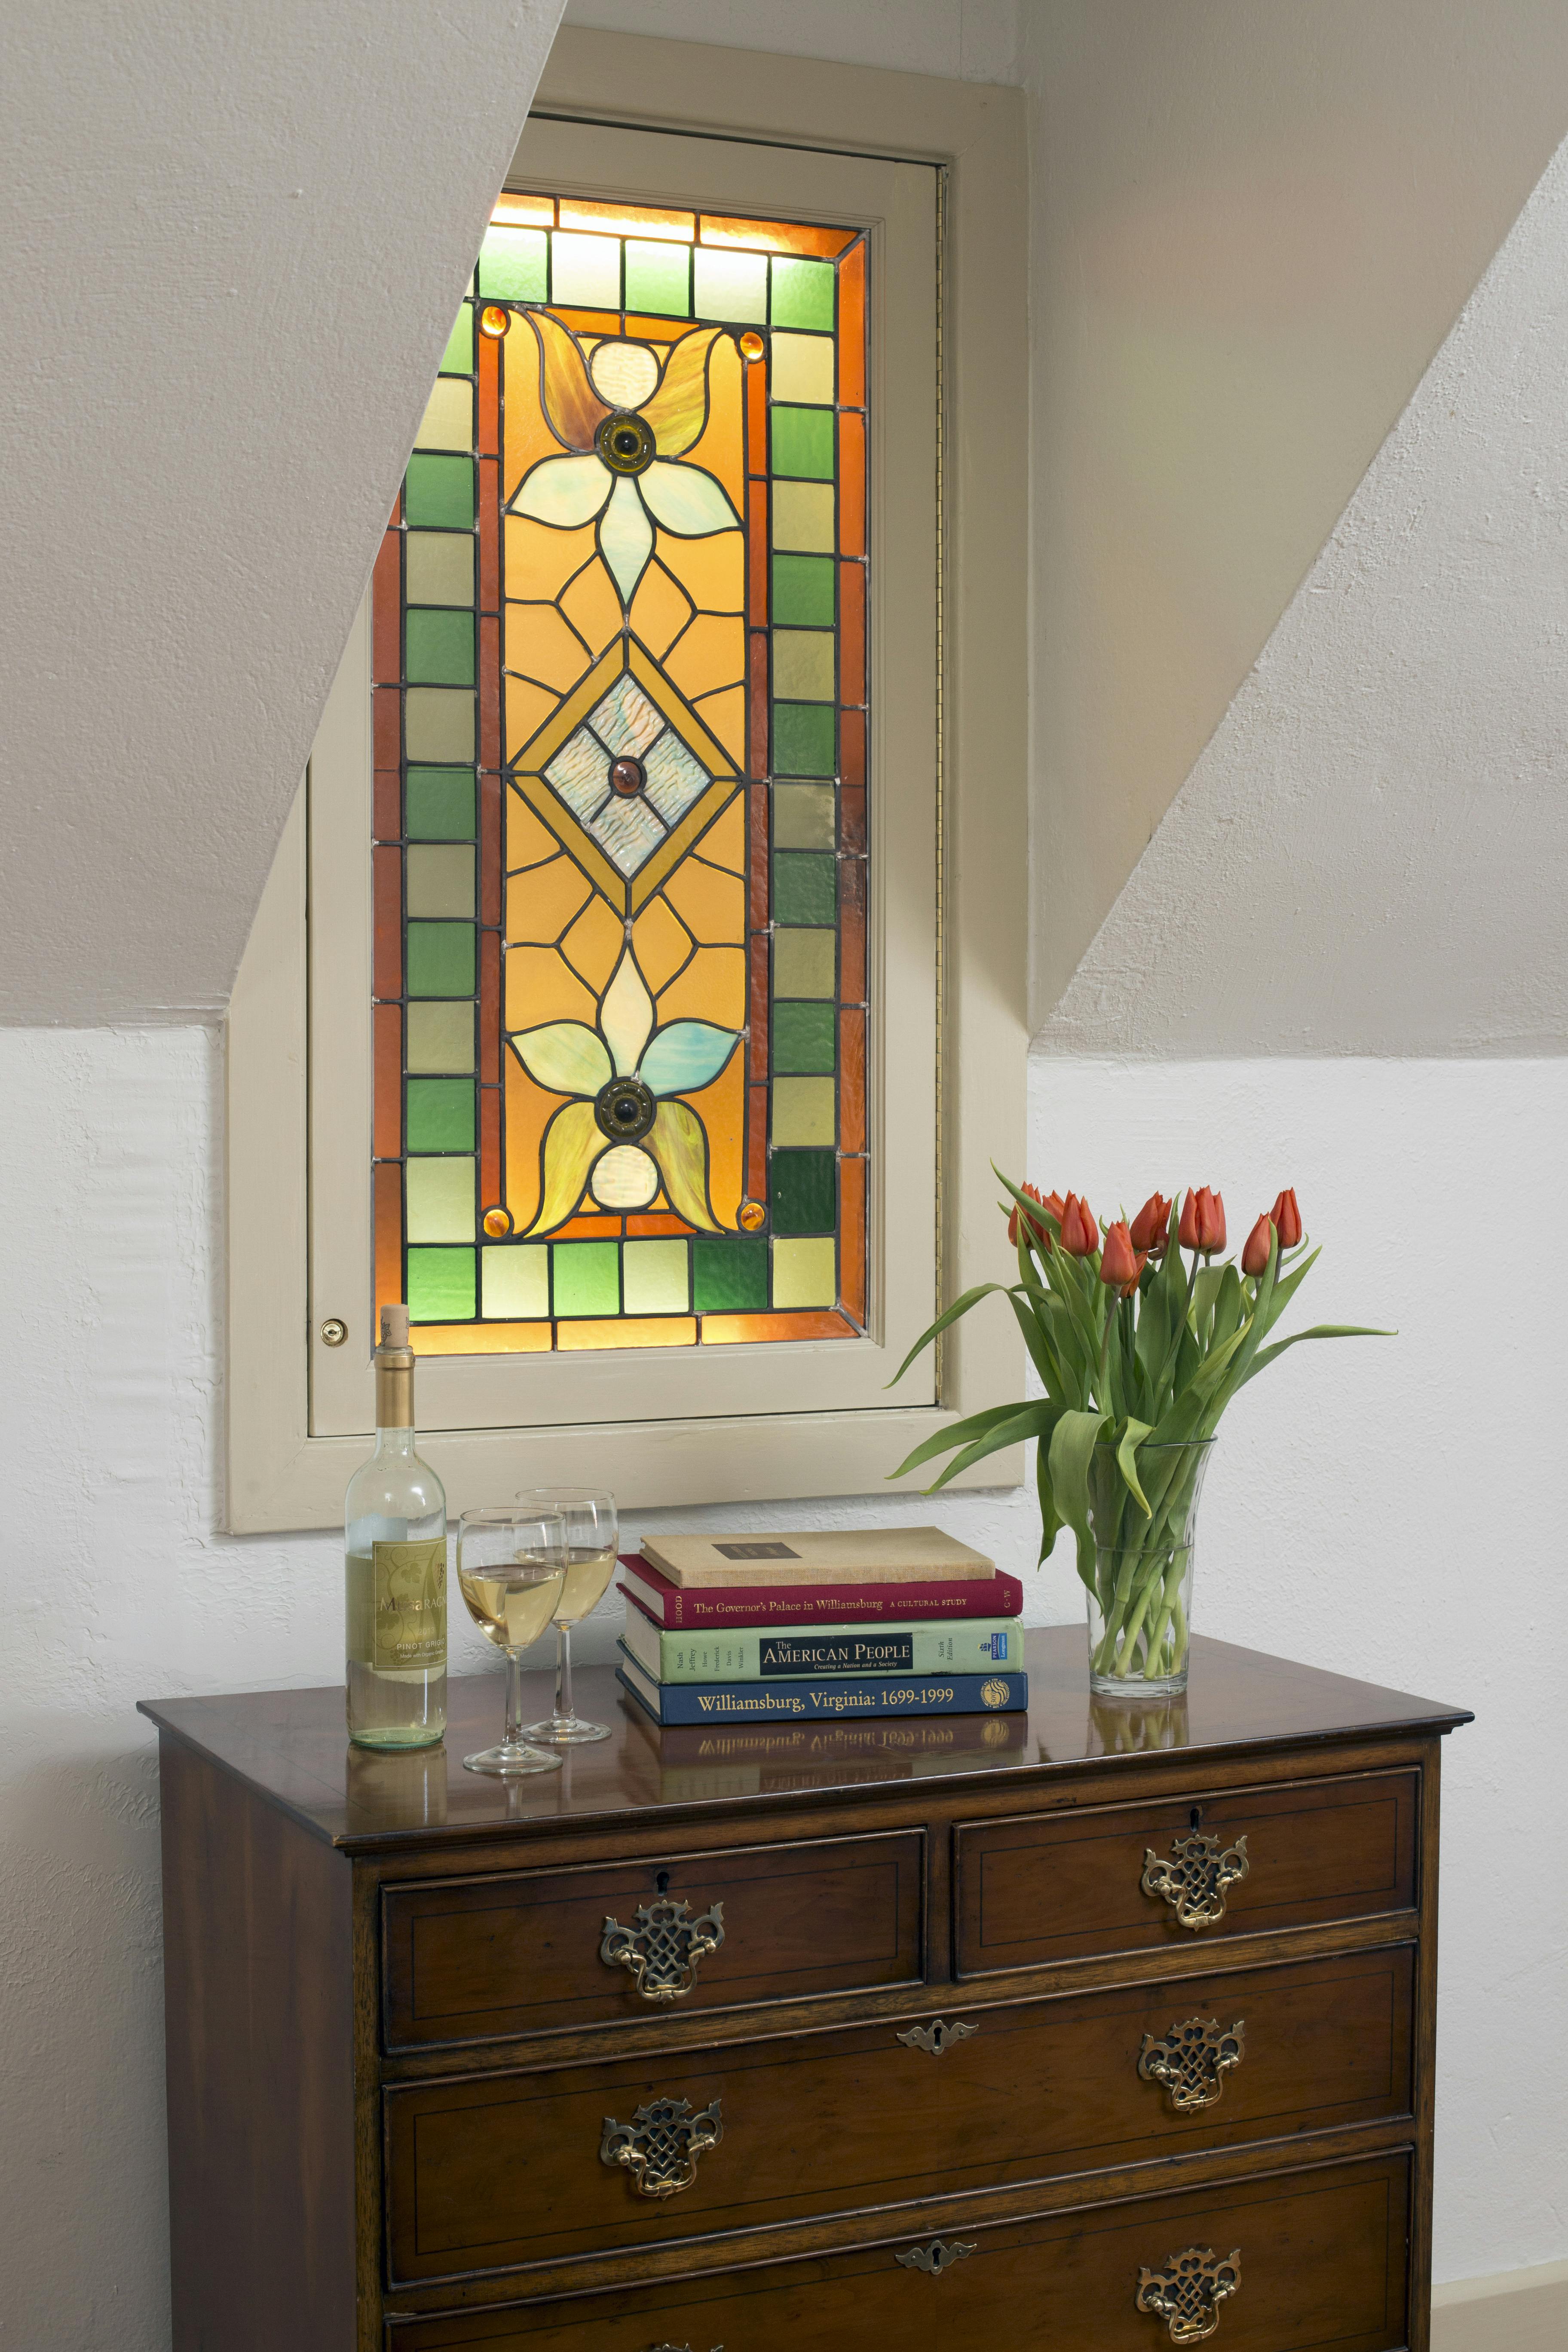 Antique chest of drawers with books, two wine glasses, a glass vase filled with tulips, and a stained glass window with flowers and geometric shapes above